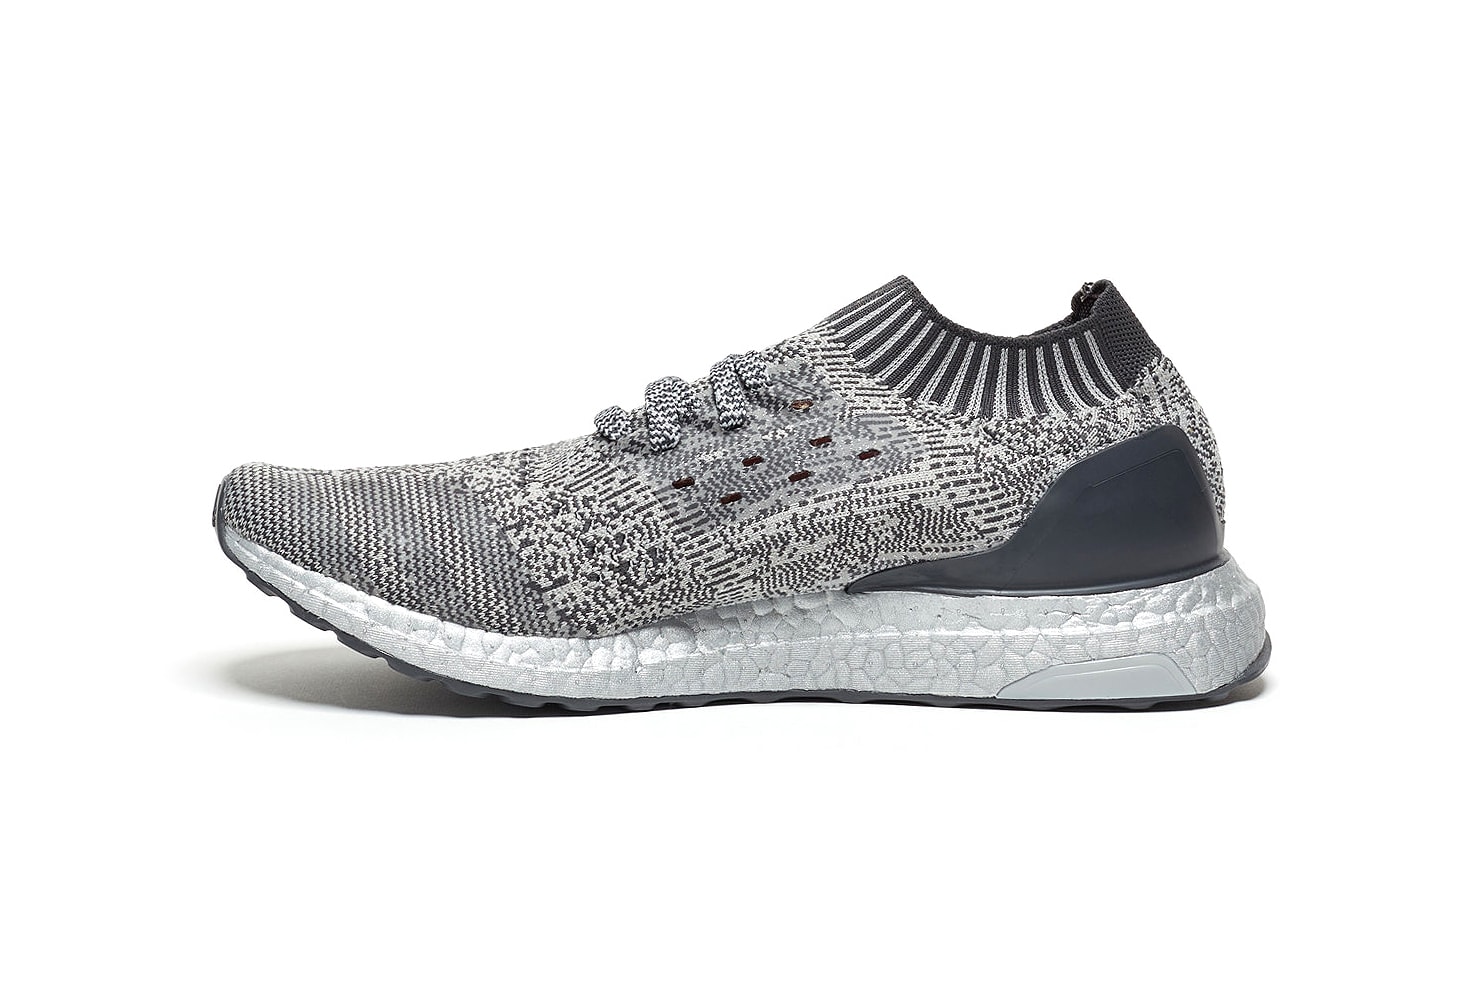 adidas UltraBOOST Uncaged Silver Release Date